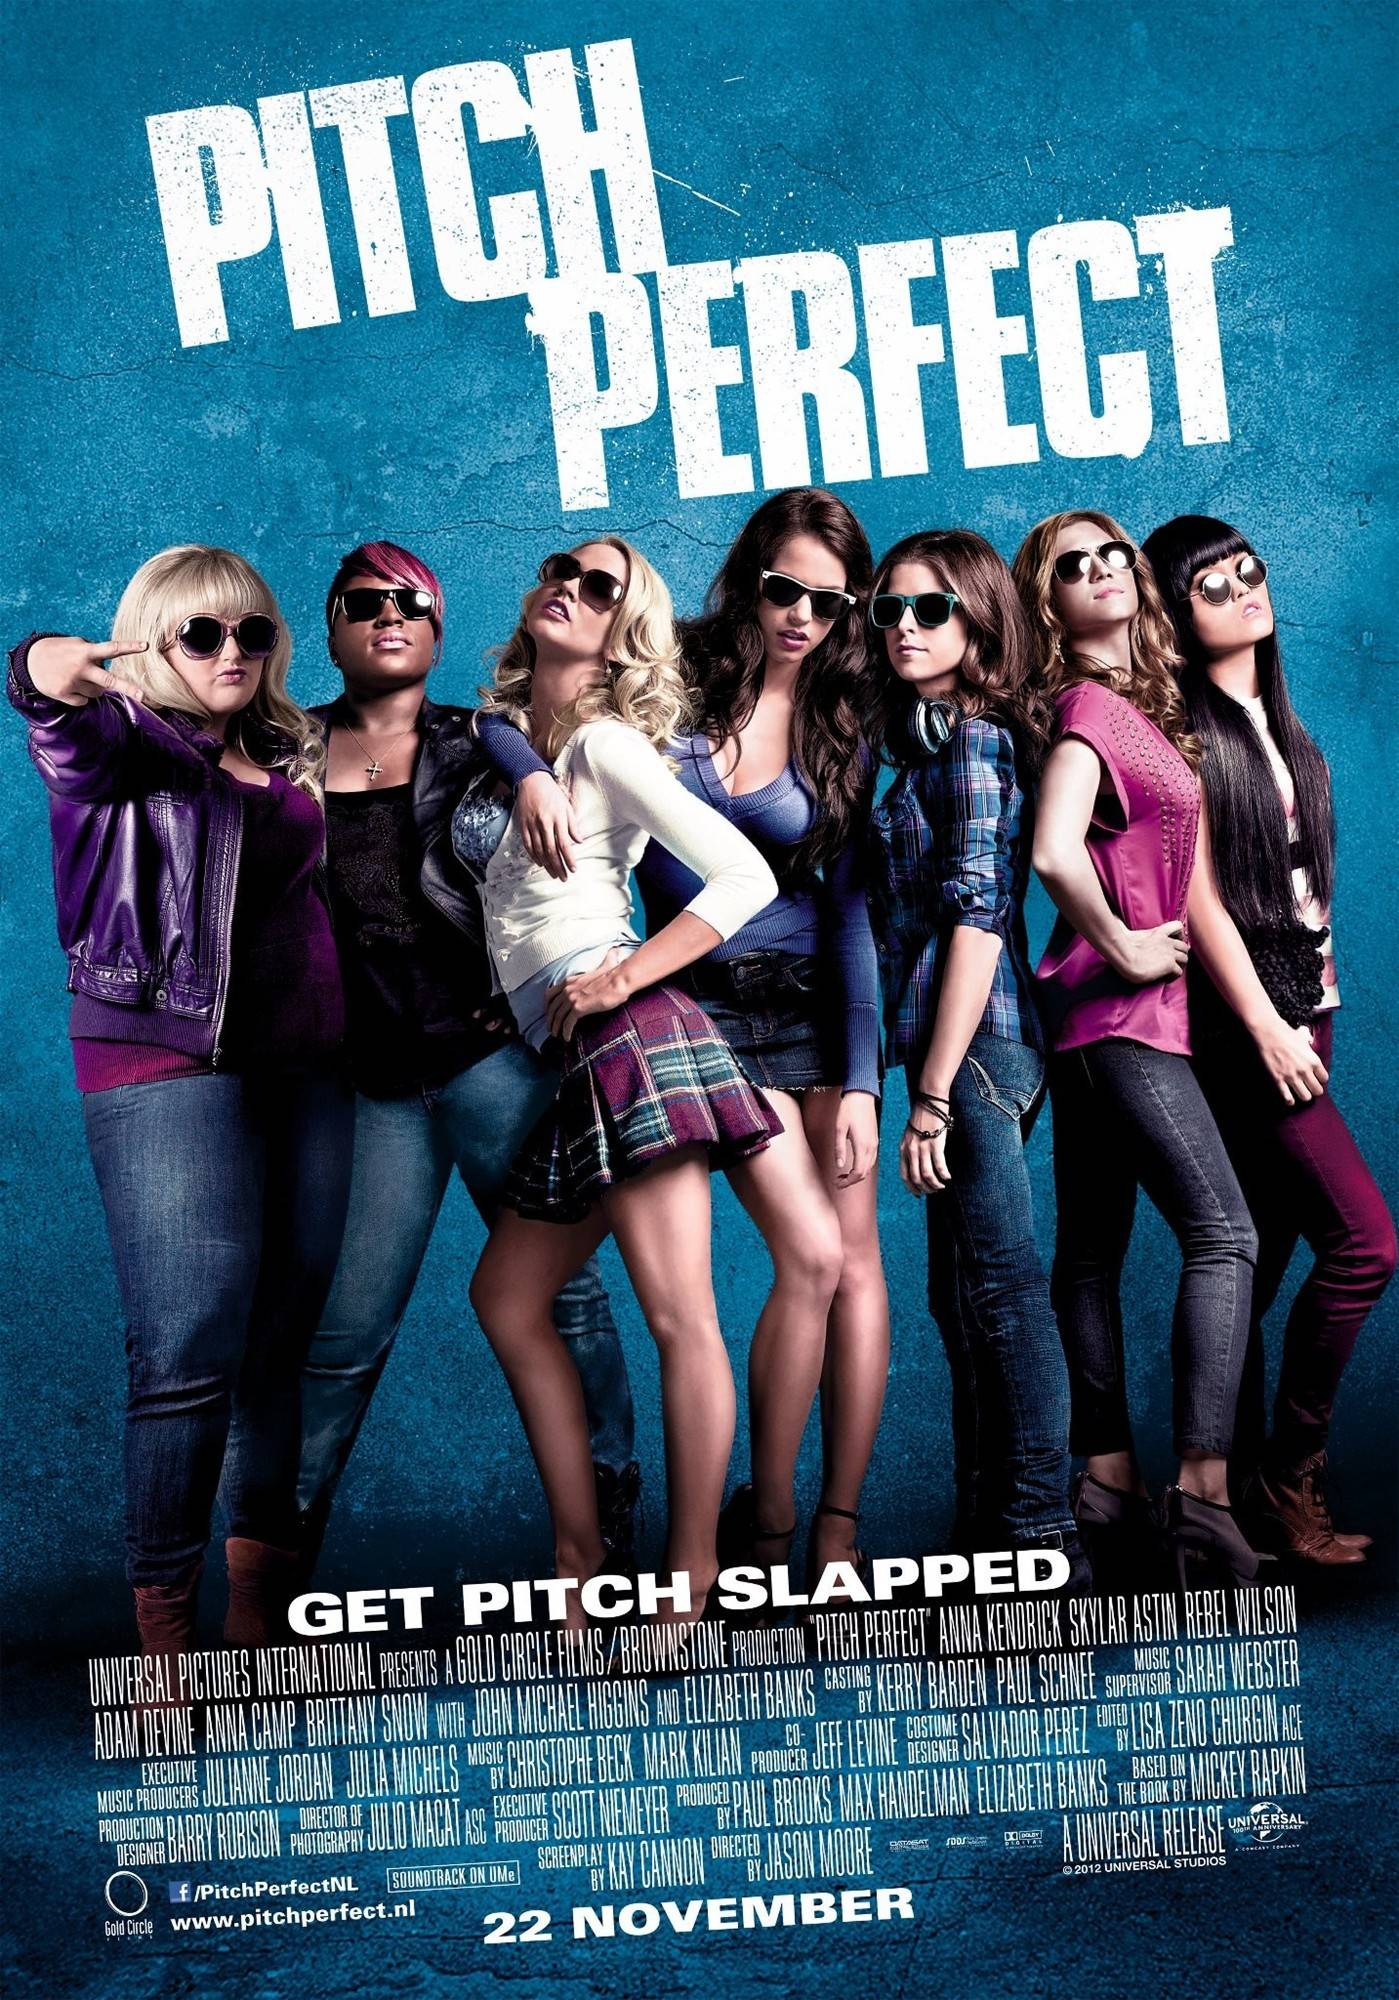 Poster of Universal Pictures' Pitch Perfect (2012)